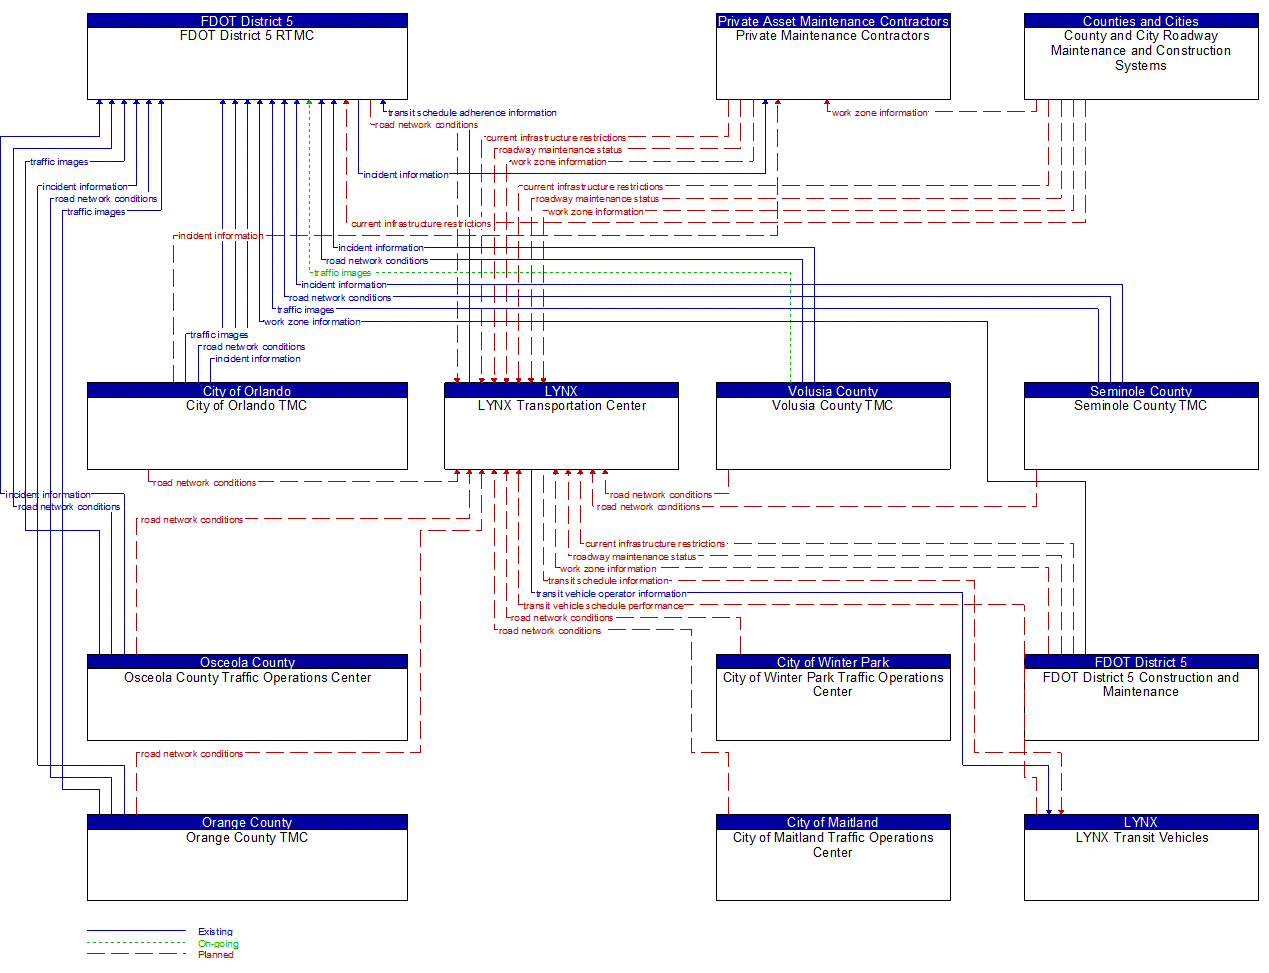 Service Graphic: Transit Fixed-Route Operations (LYNX Operations Center)